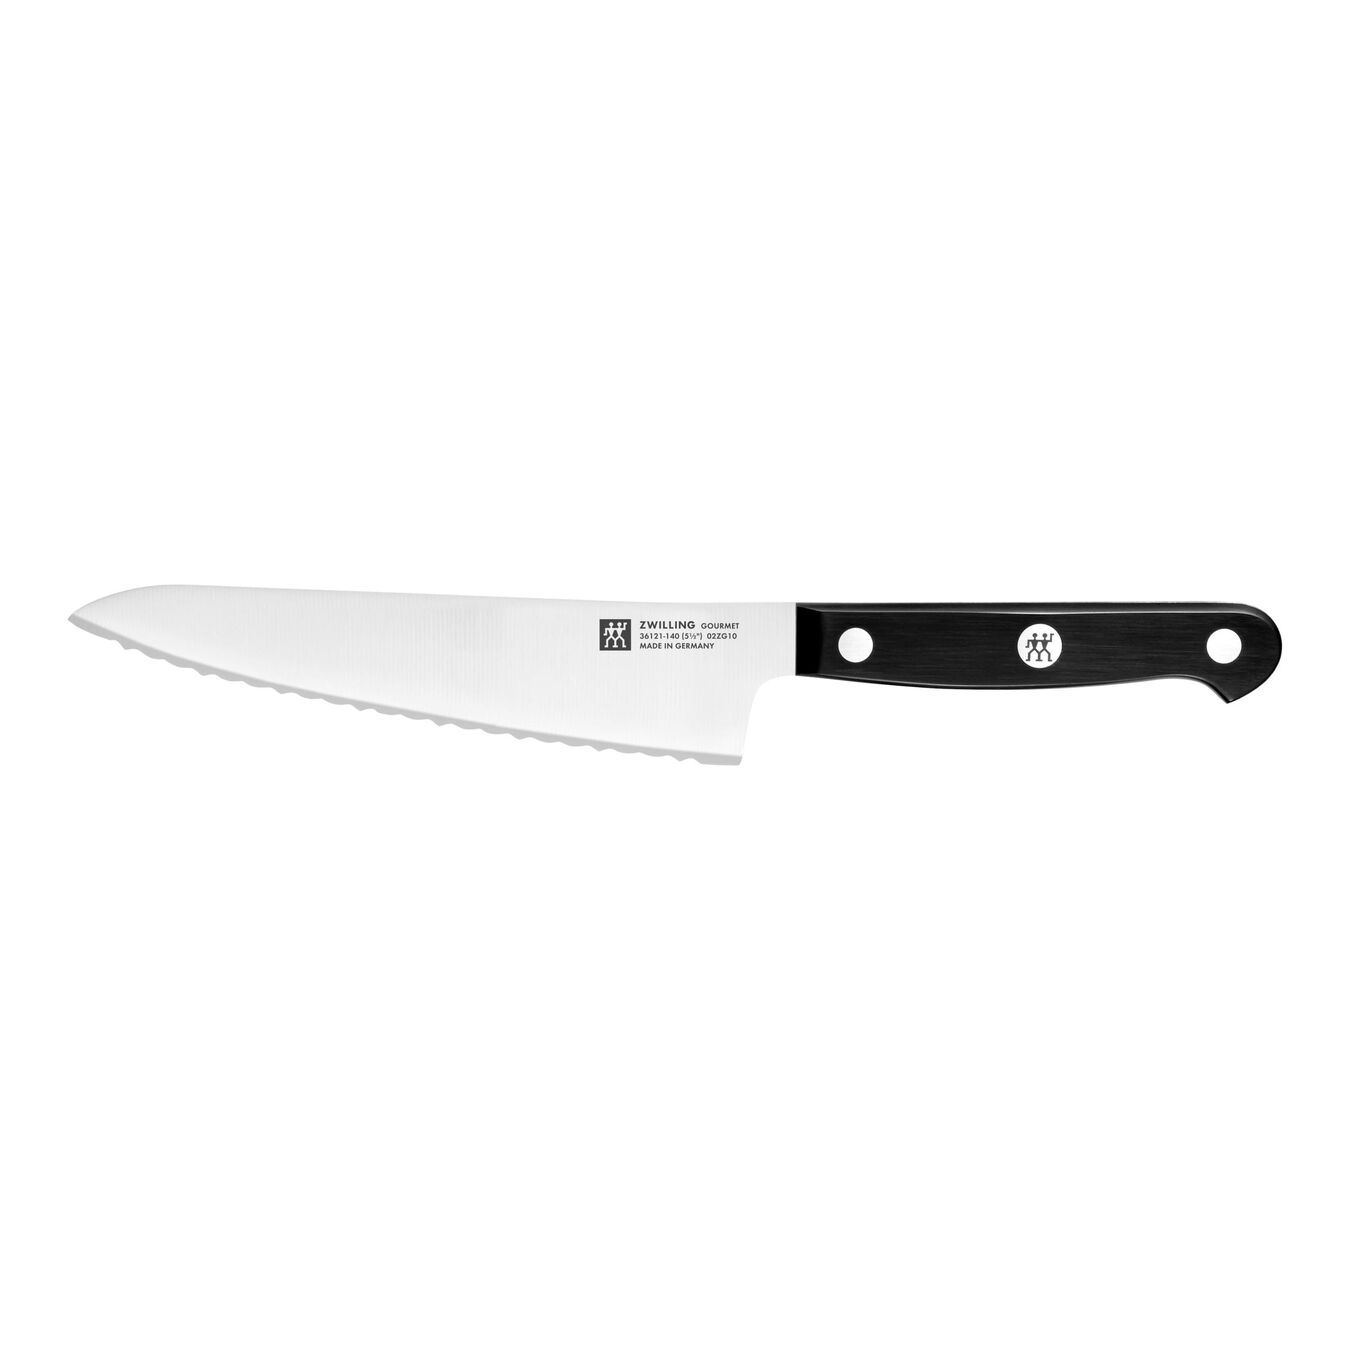 5.5-inch Chef's knife compact, Serrated edge  - Visual Imperfections,,large 1